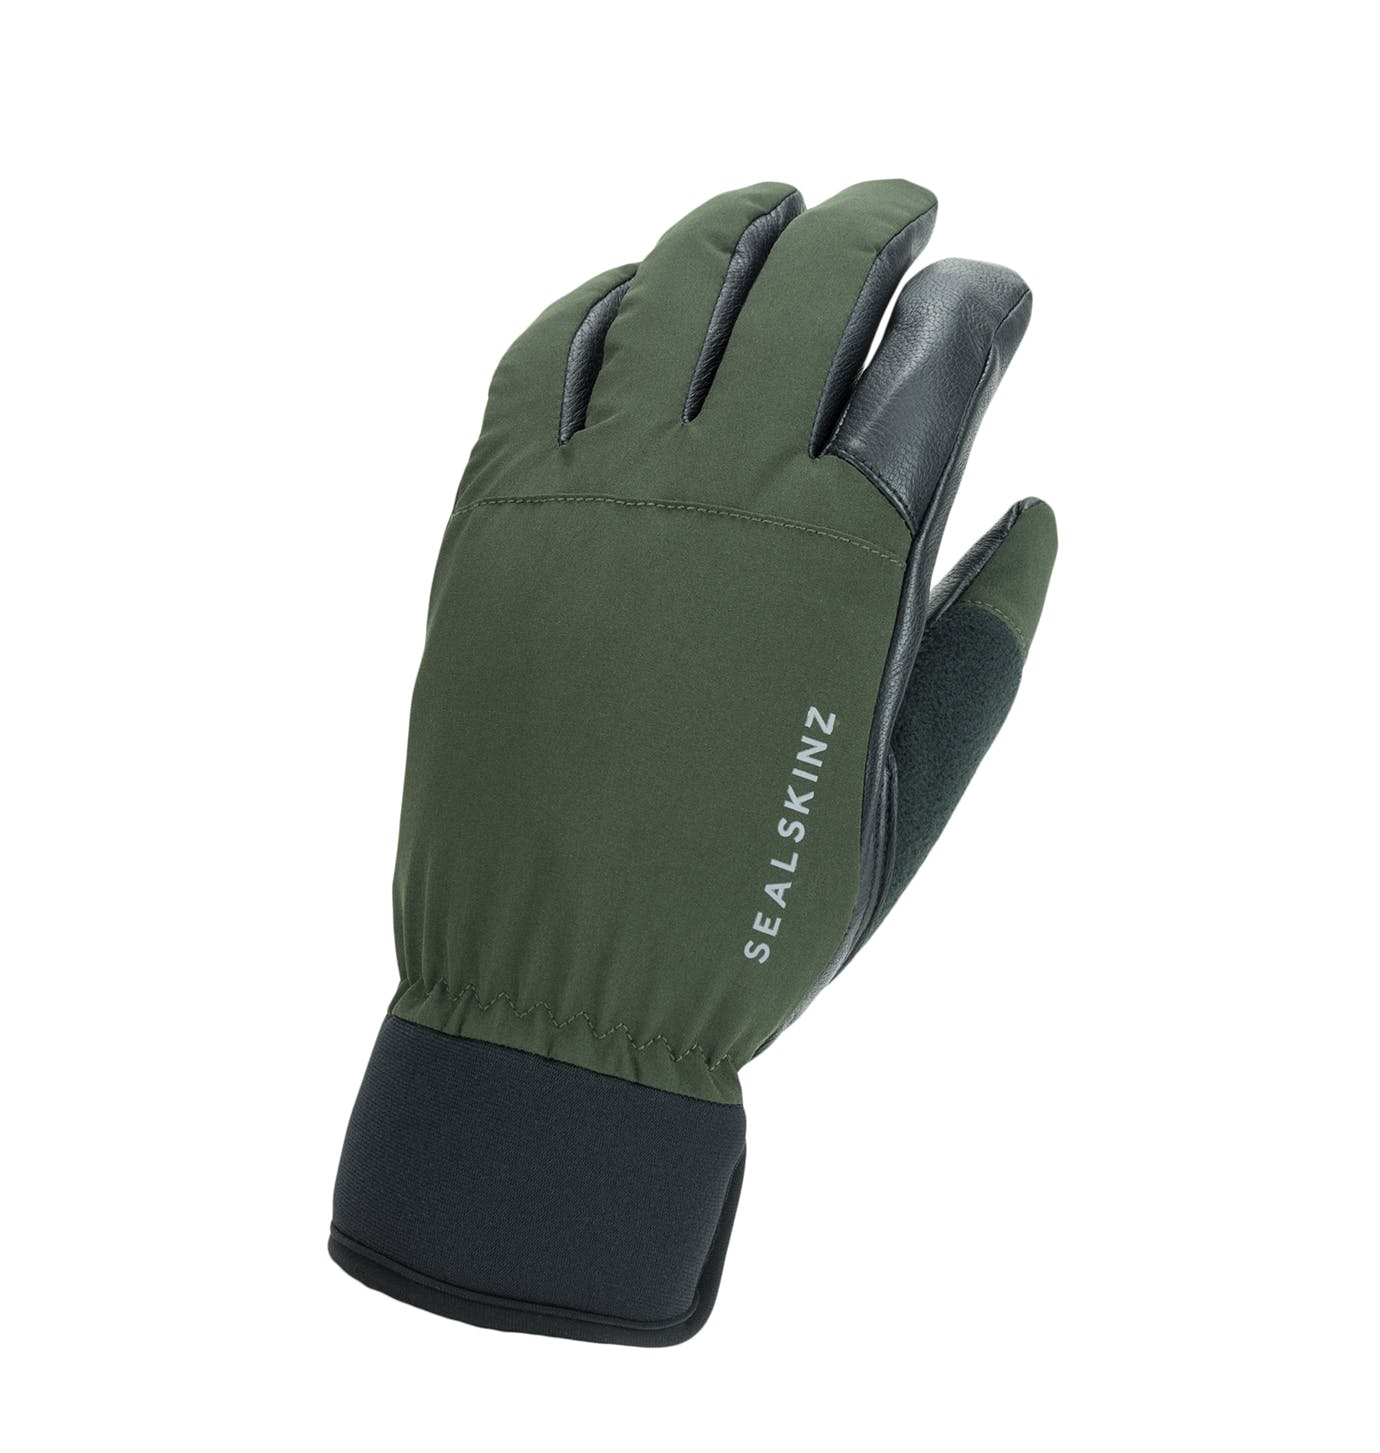 Outdoor Sports Fishing Warm Gloves for Men Women 3-Finger Cut Cycling Gloves